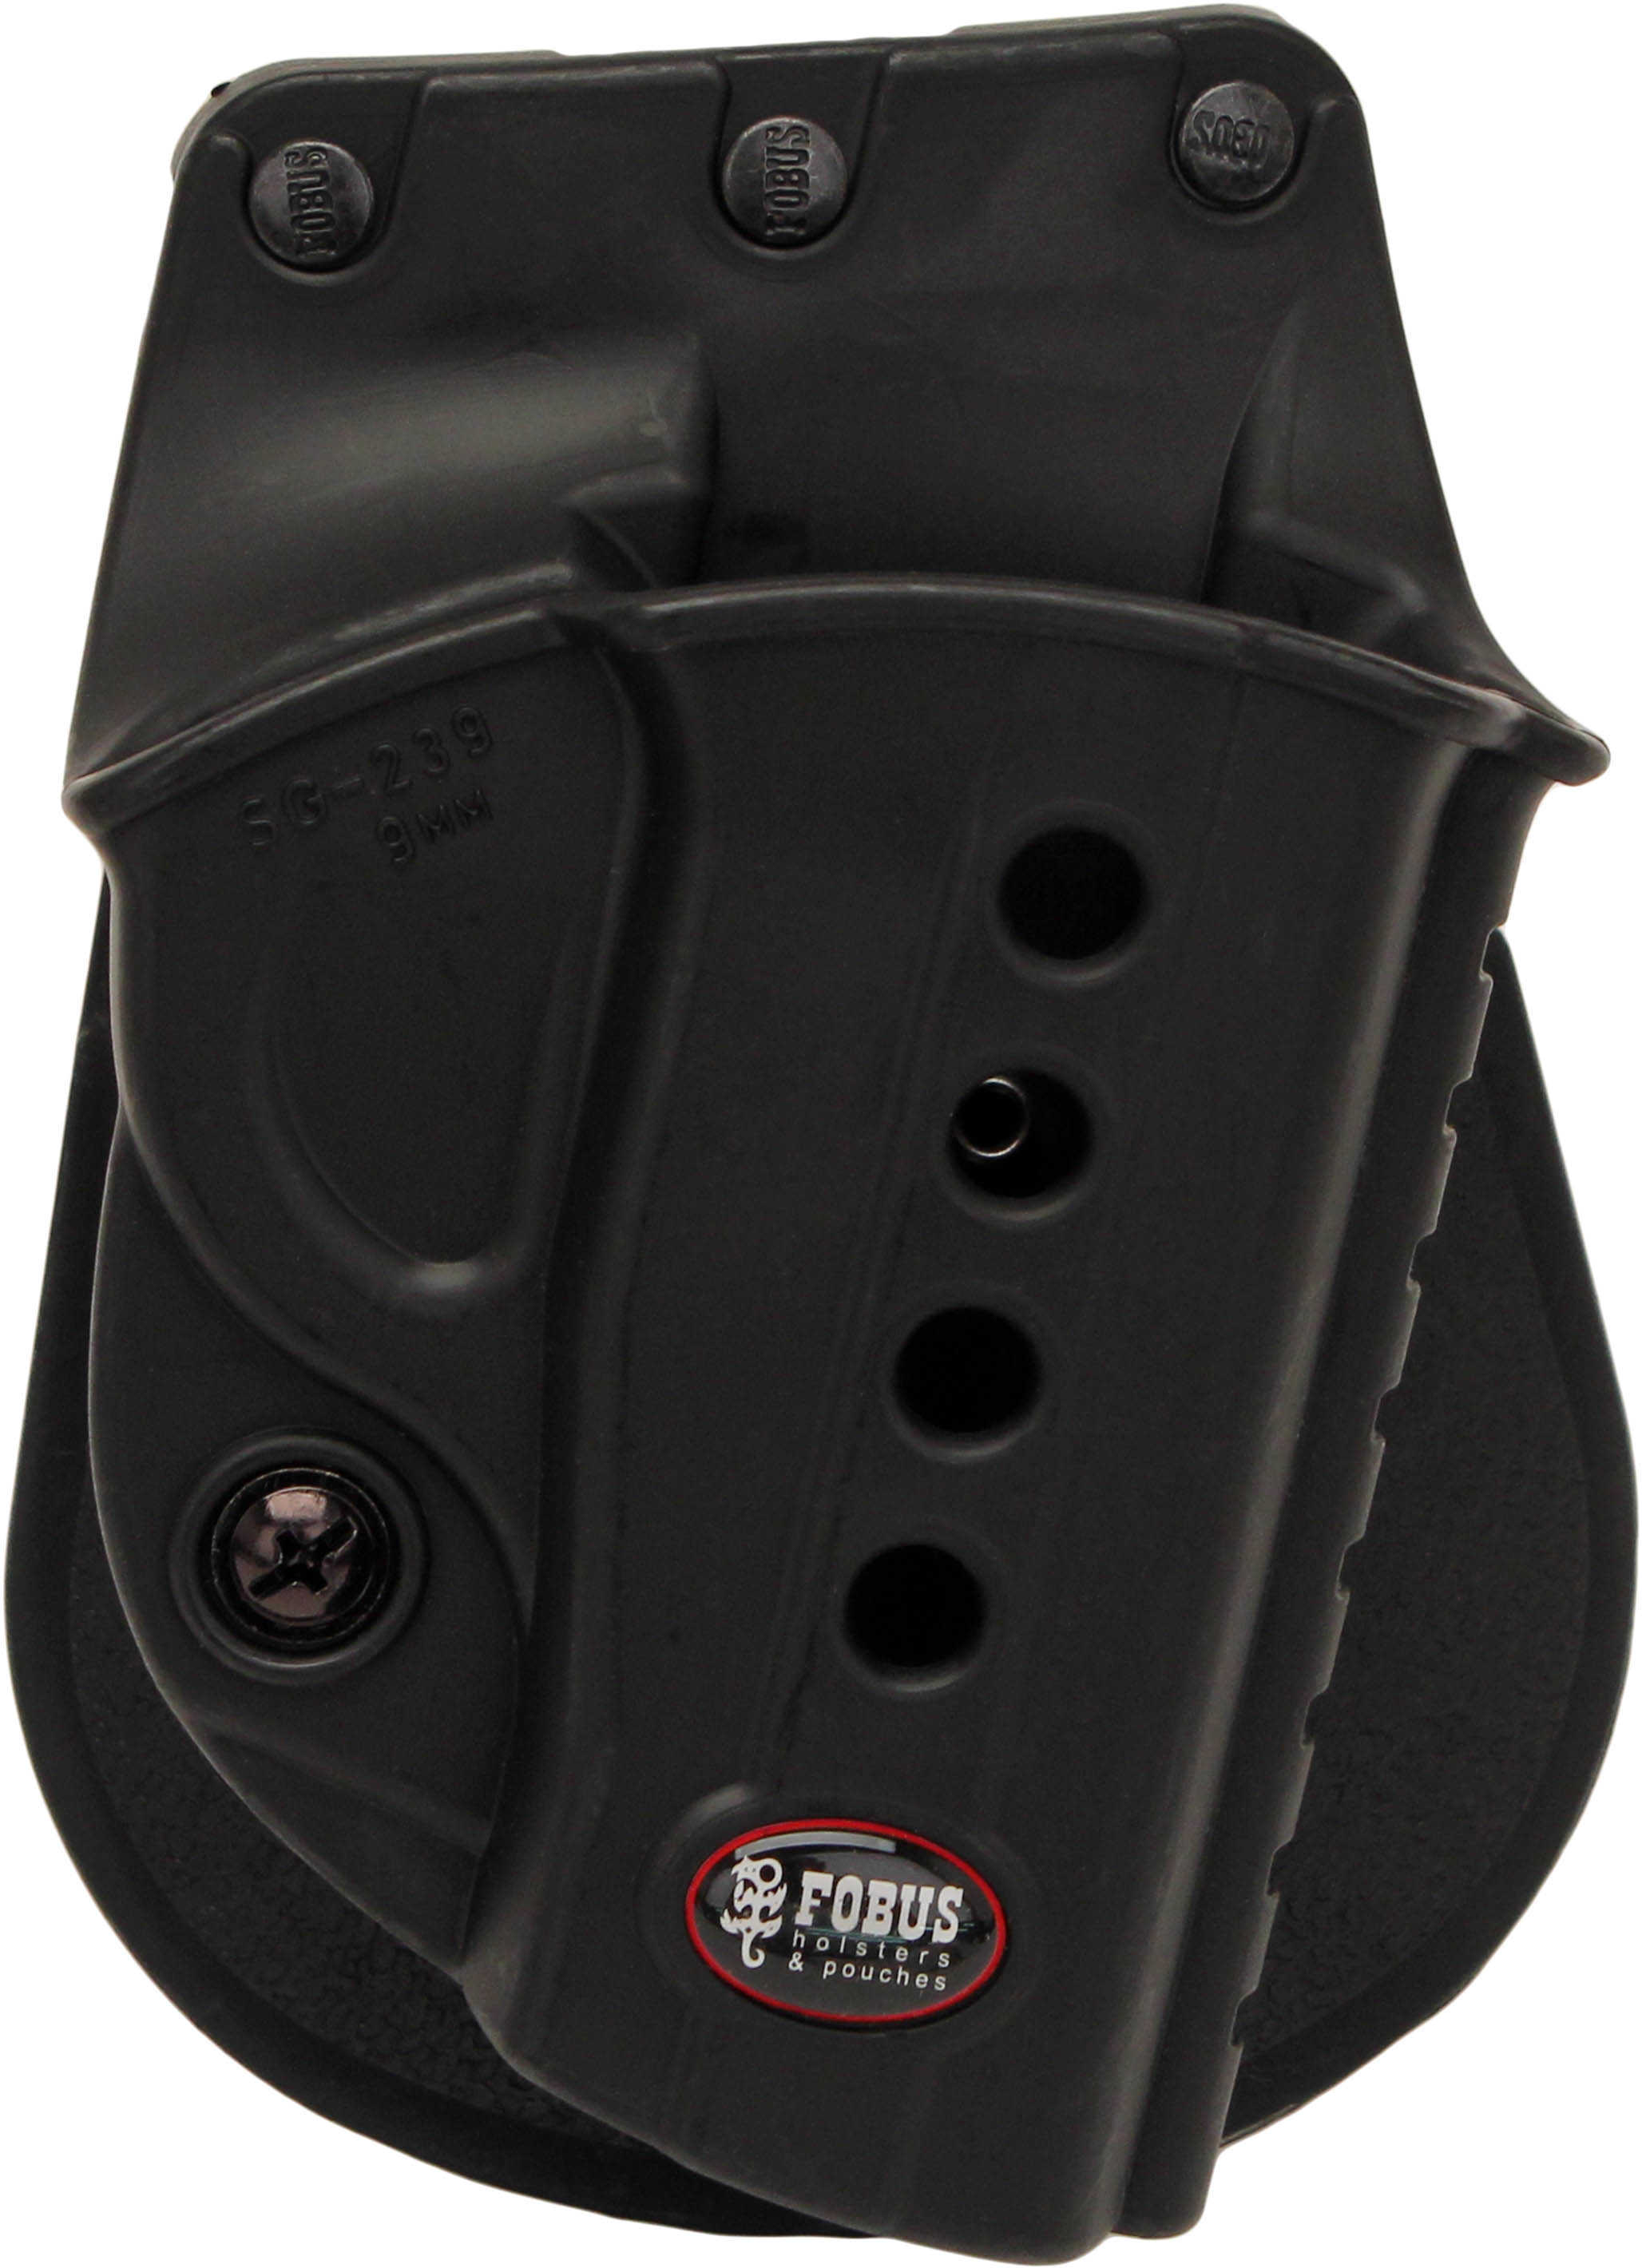 Fobus Roto Evolution Paddle Holster Fits Sig P239 Md: SG239Rp